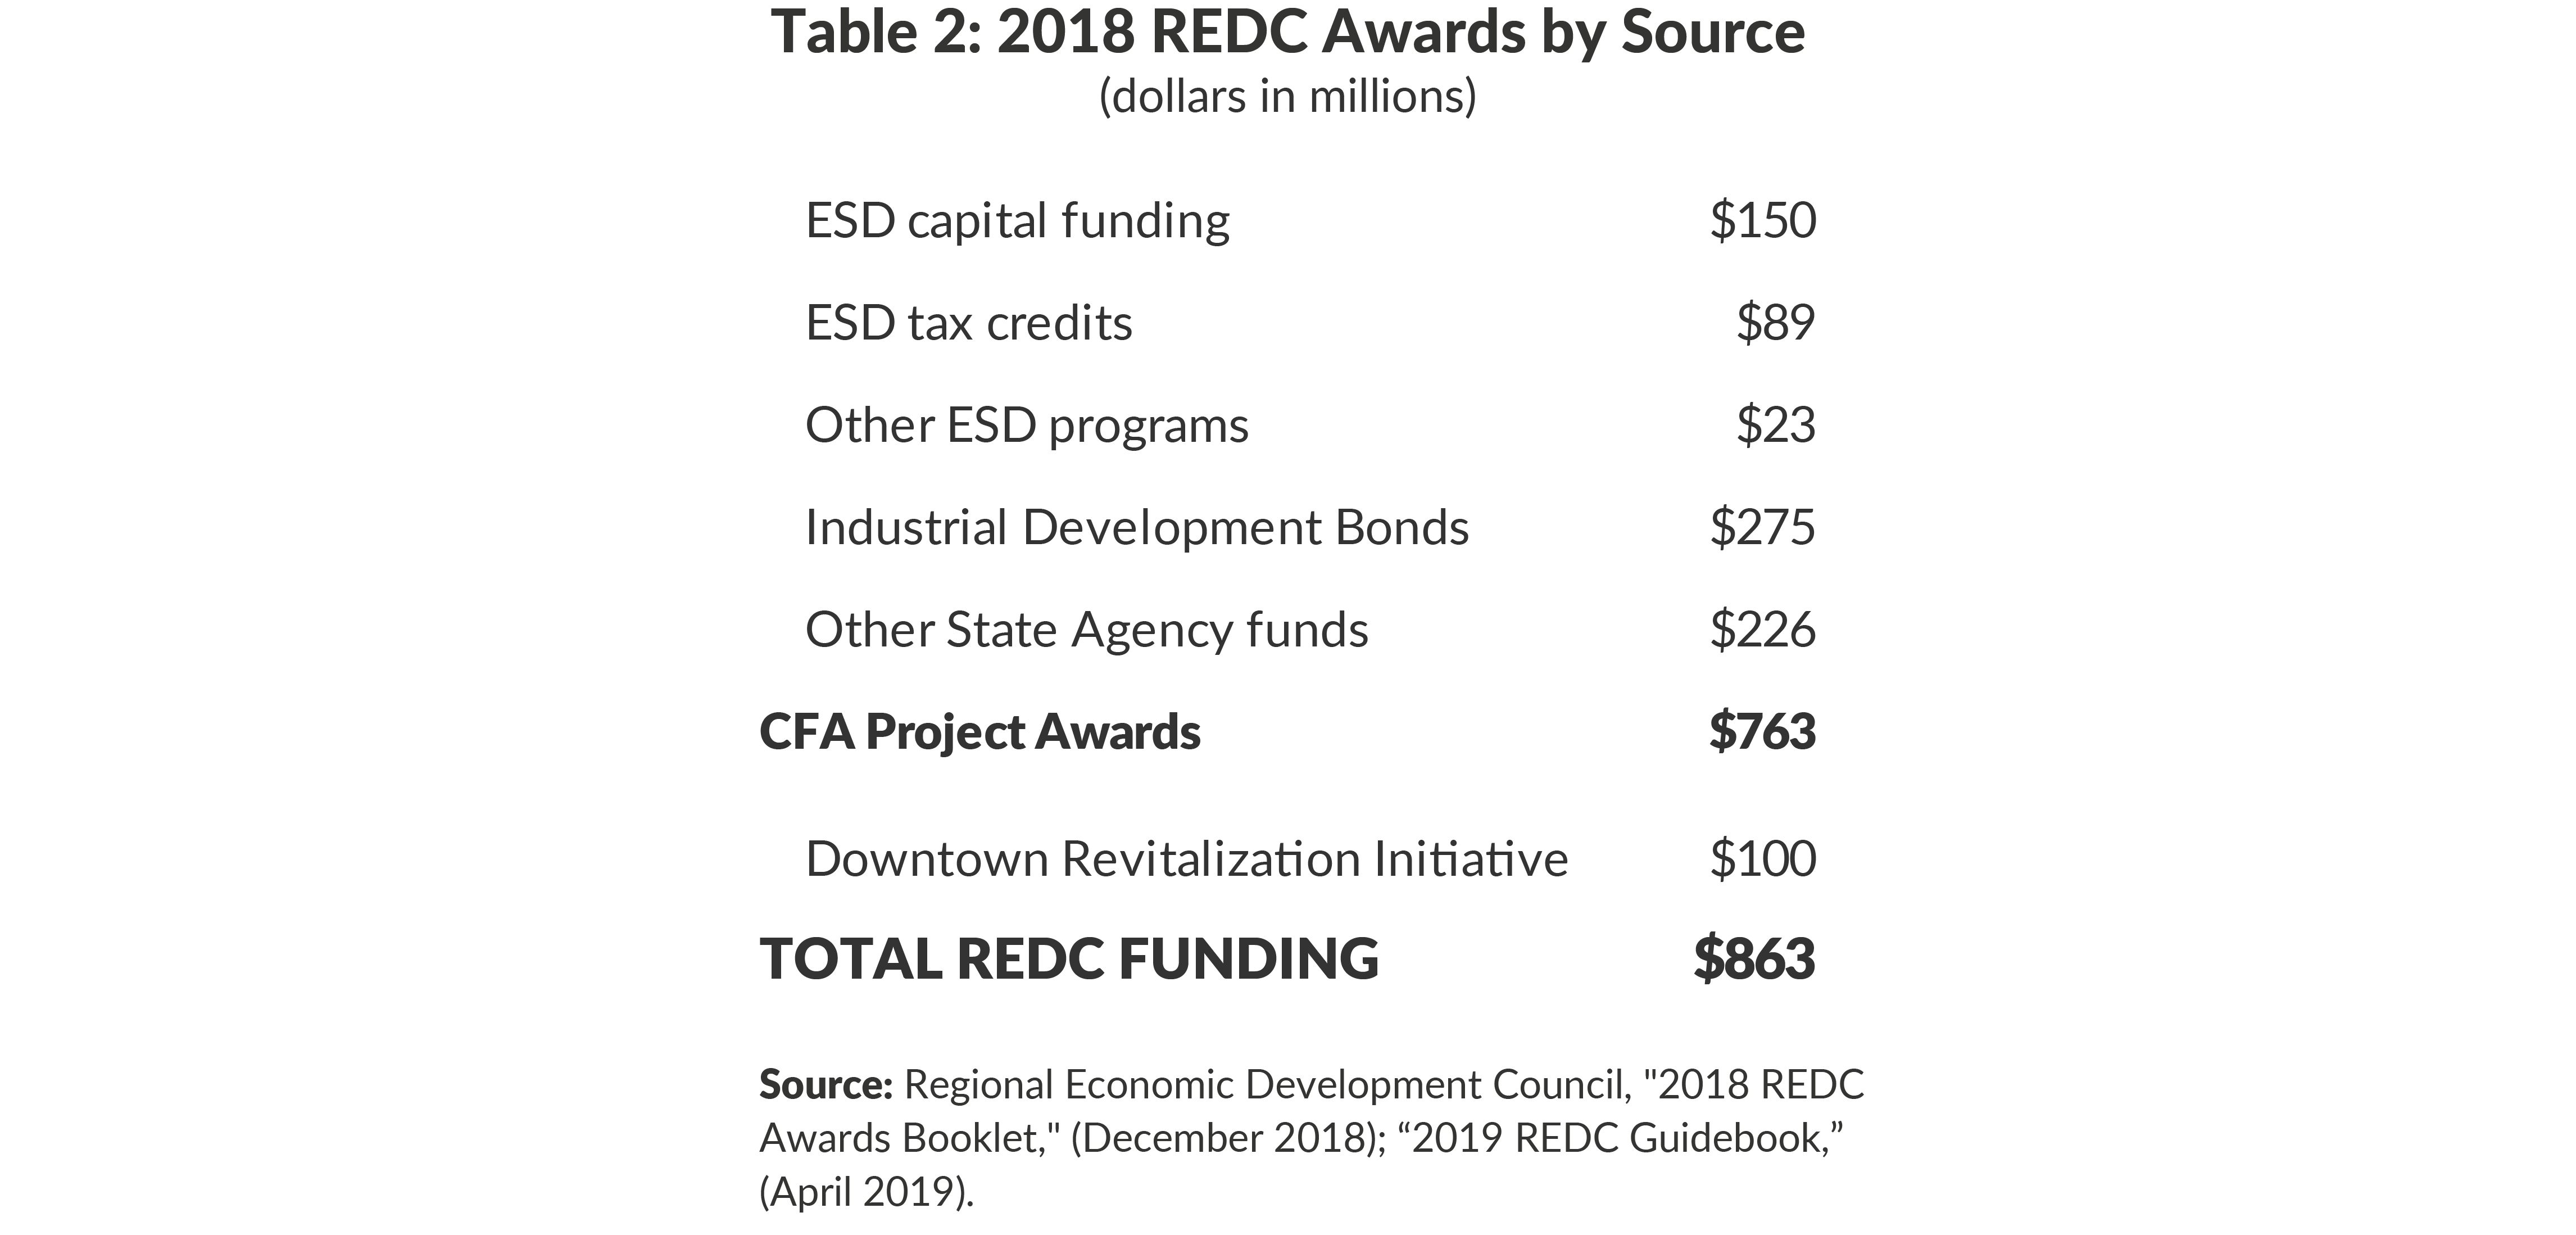 Table 2: 2018 REDC Awards by Source